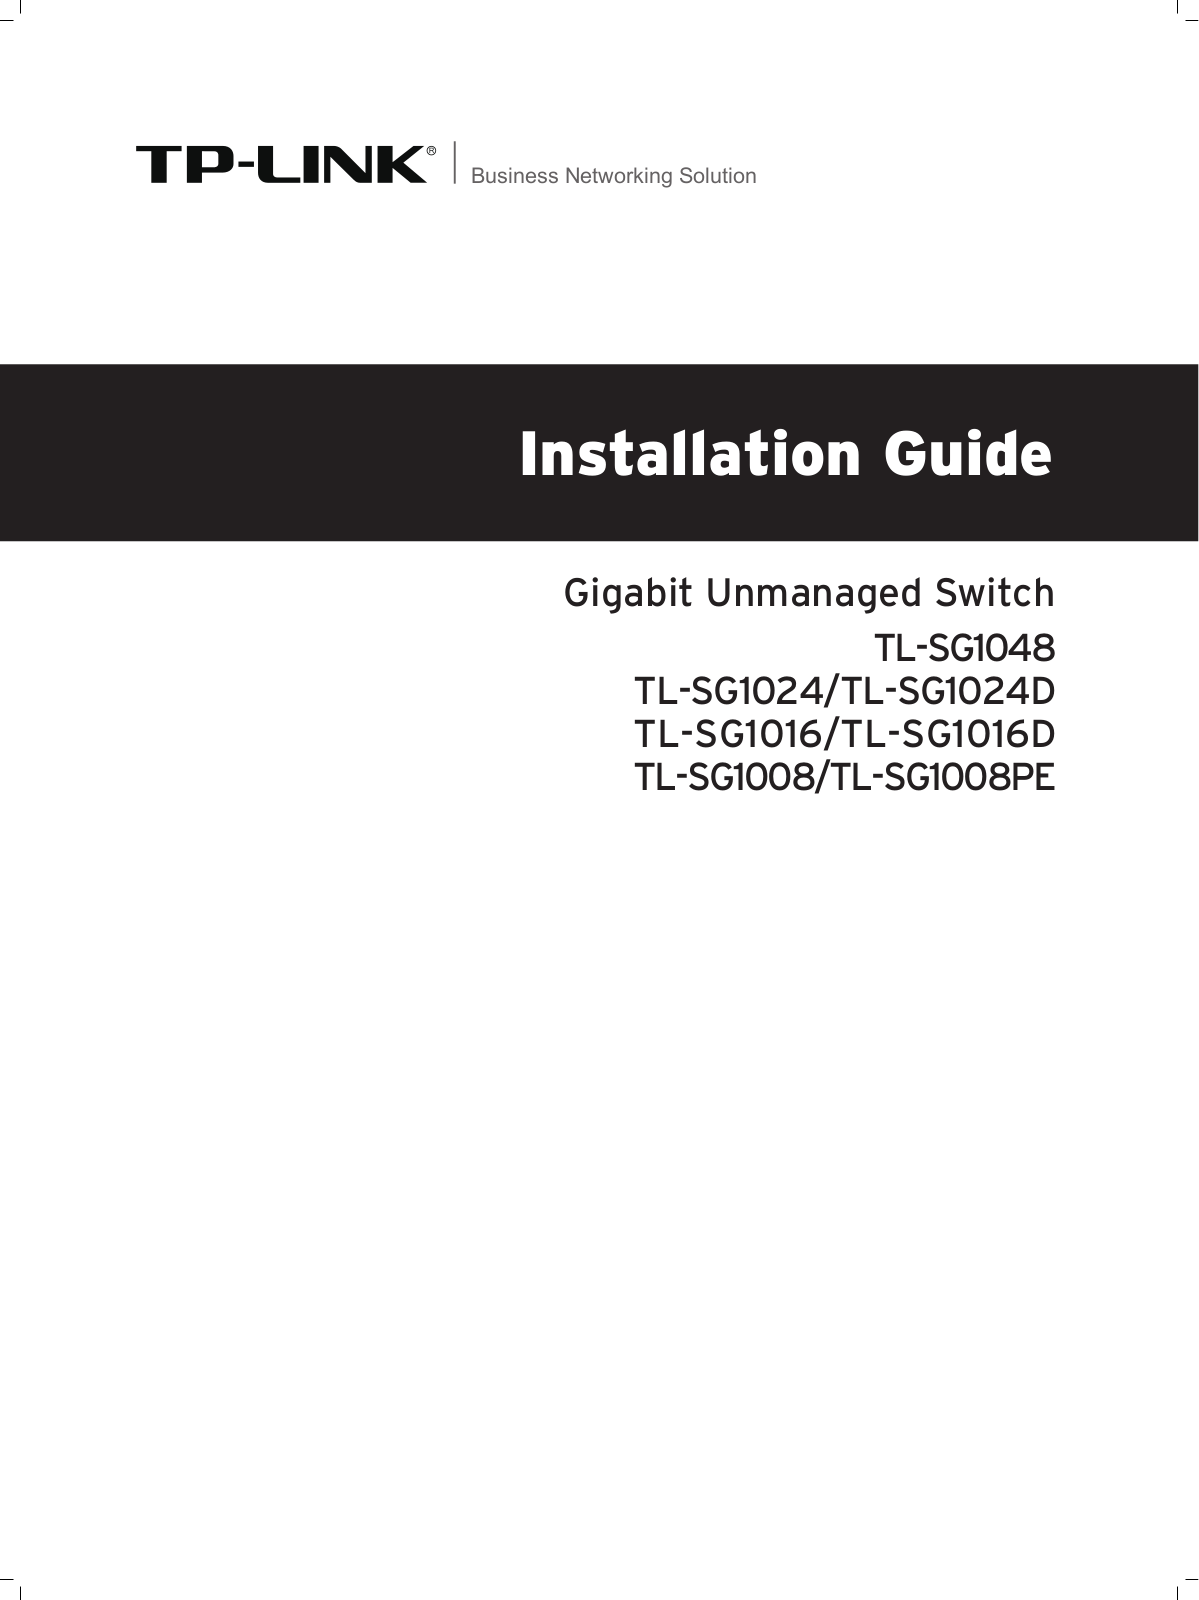 TP-Link TL-SG10160 Quick Installation Guide